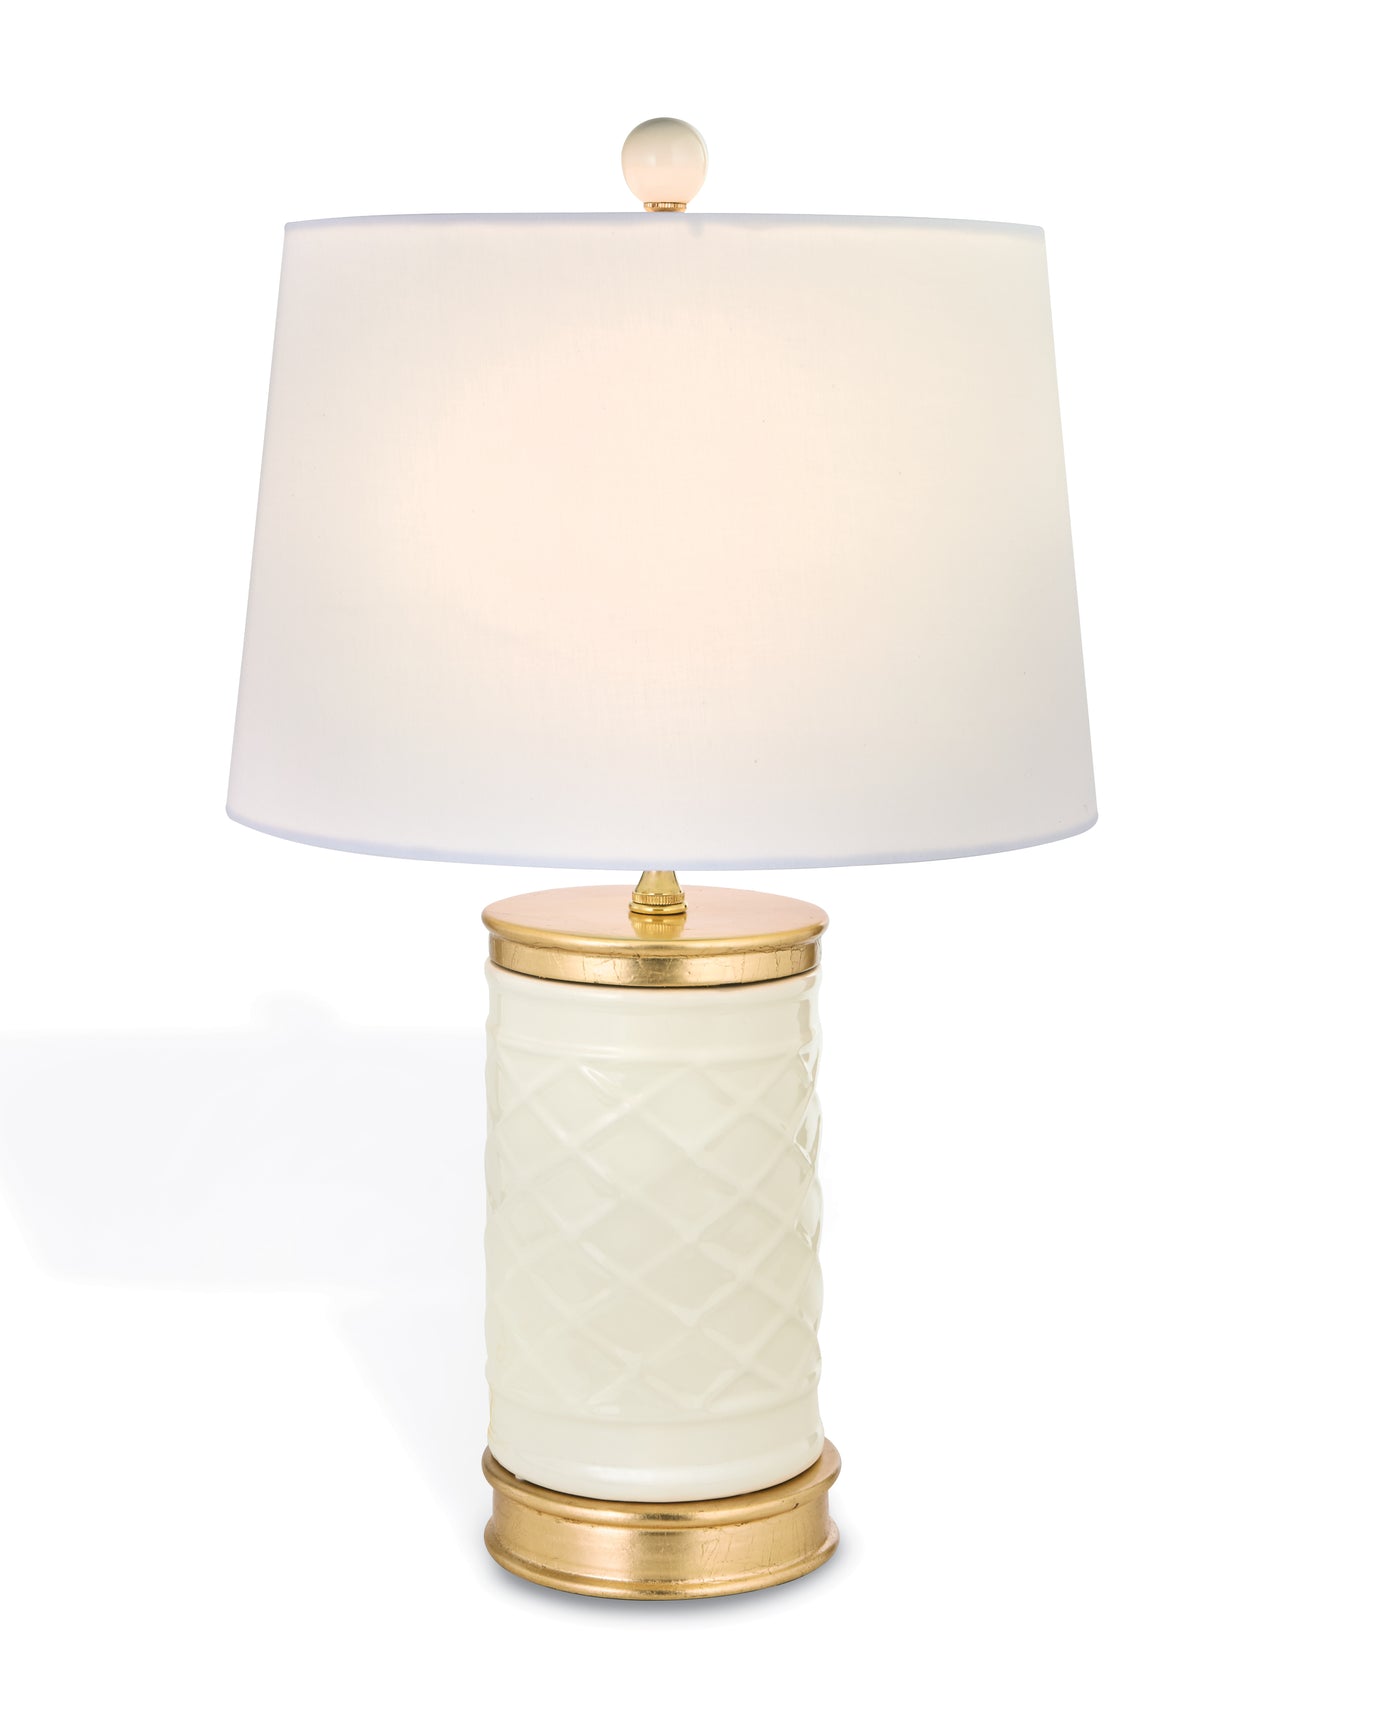 White Porcelain Clairie Lamp with Gold Trim